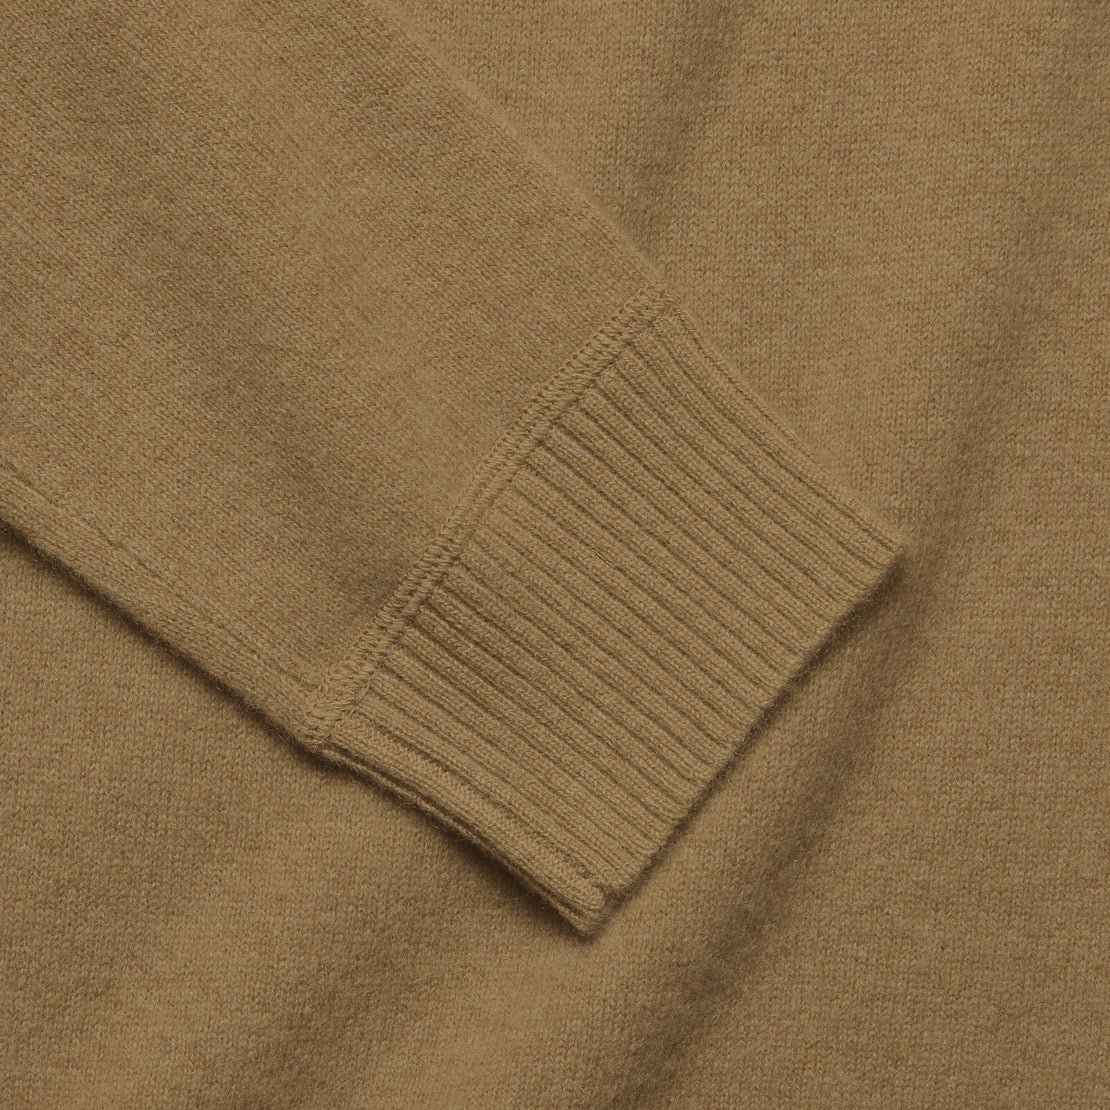 Columbia Cashmere Sweater - Camel - Life After Denim - STAG Provisions - Tops - Sweater